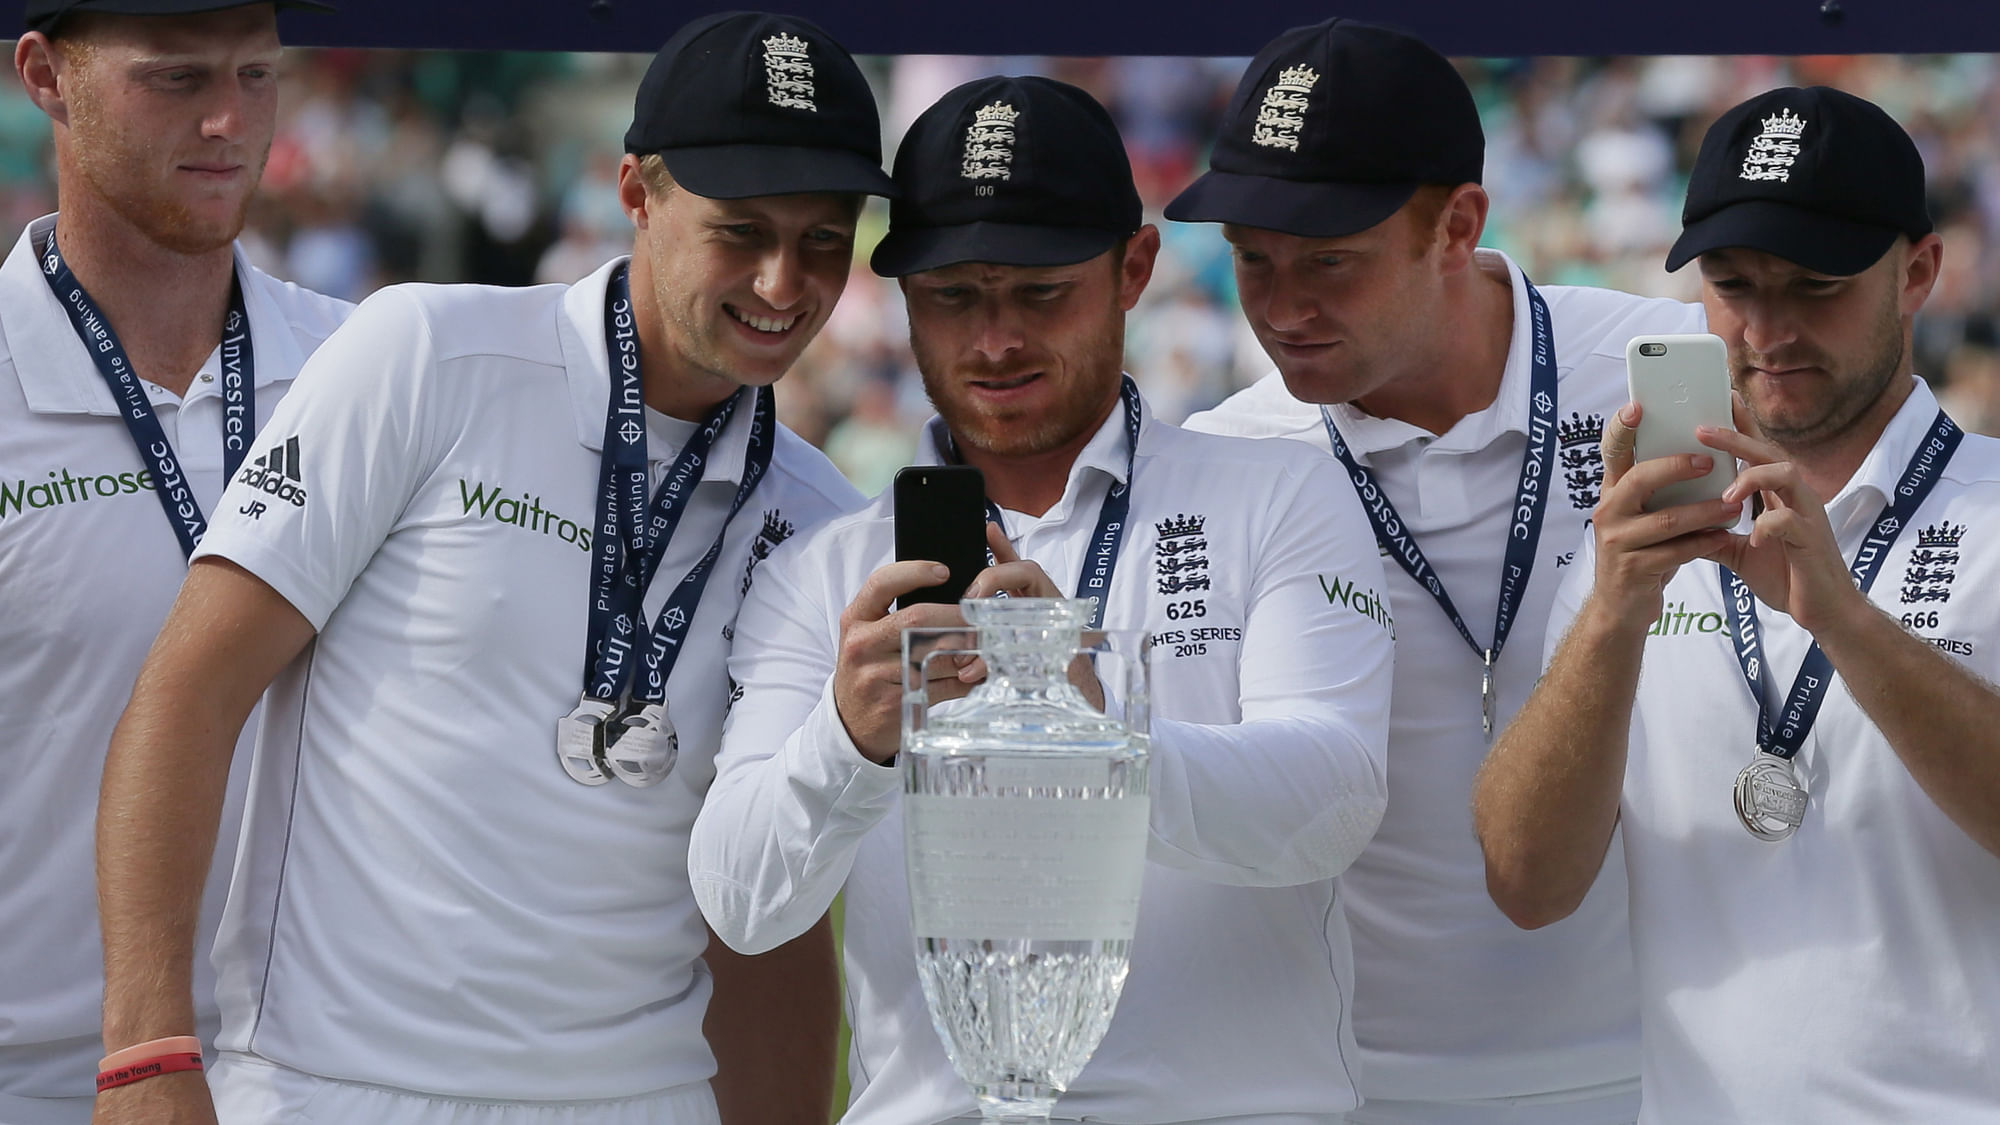 England’s Joe Root, second left, and teammate England’s Ian Bell, center, take pictures on their phones prior to a presentation ceremony on the fourth day of the fifth Ashes test.&nbsp;(Photo: AP)